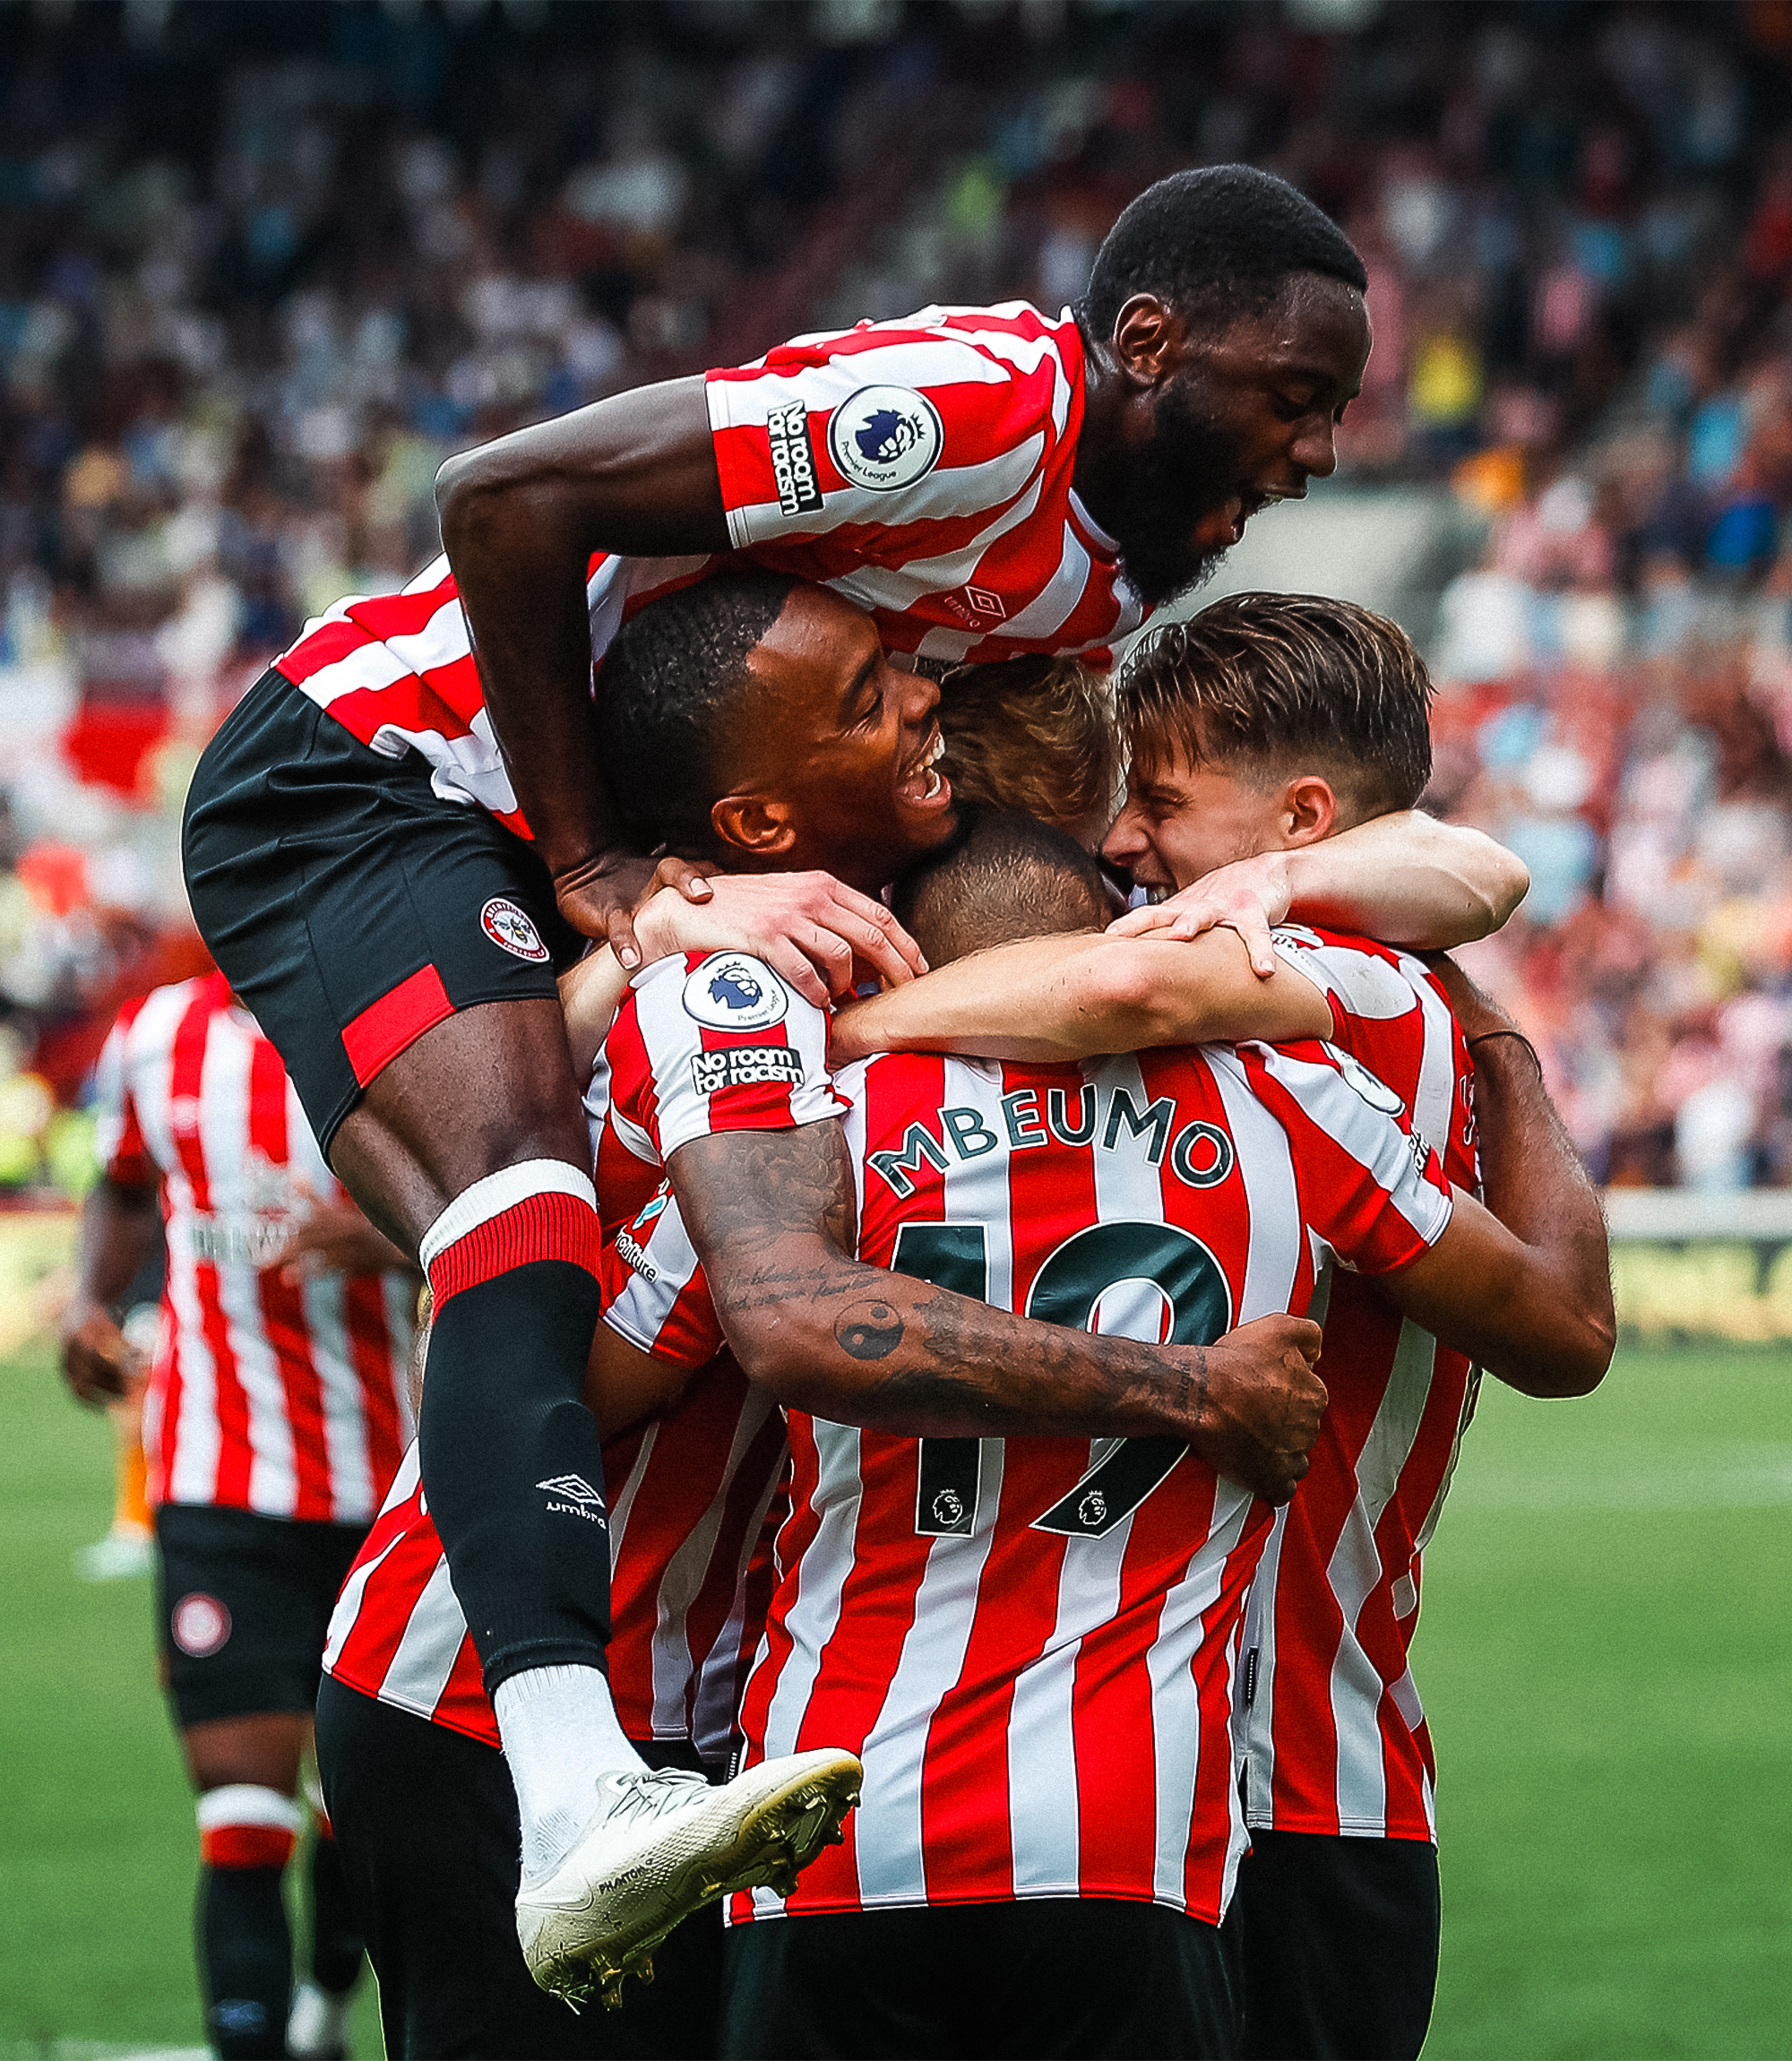 Brentford players celebrate our fourth goal against Leeds United last time out at home